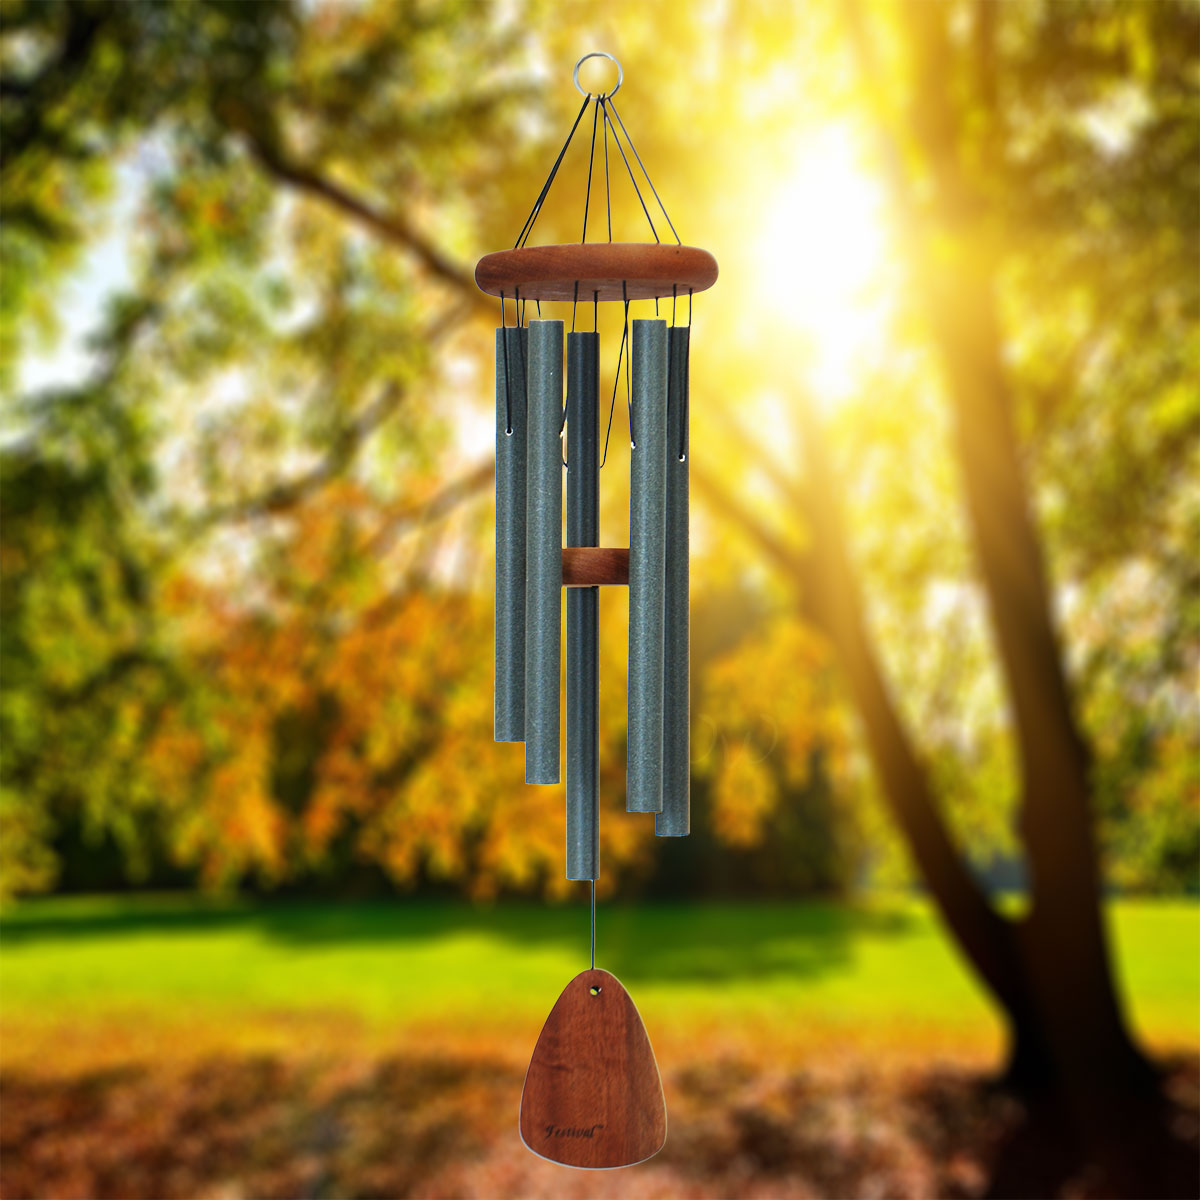 Festival 28-inch 5-Tube Wind chime in Forest Green